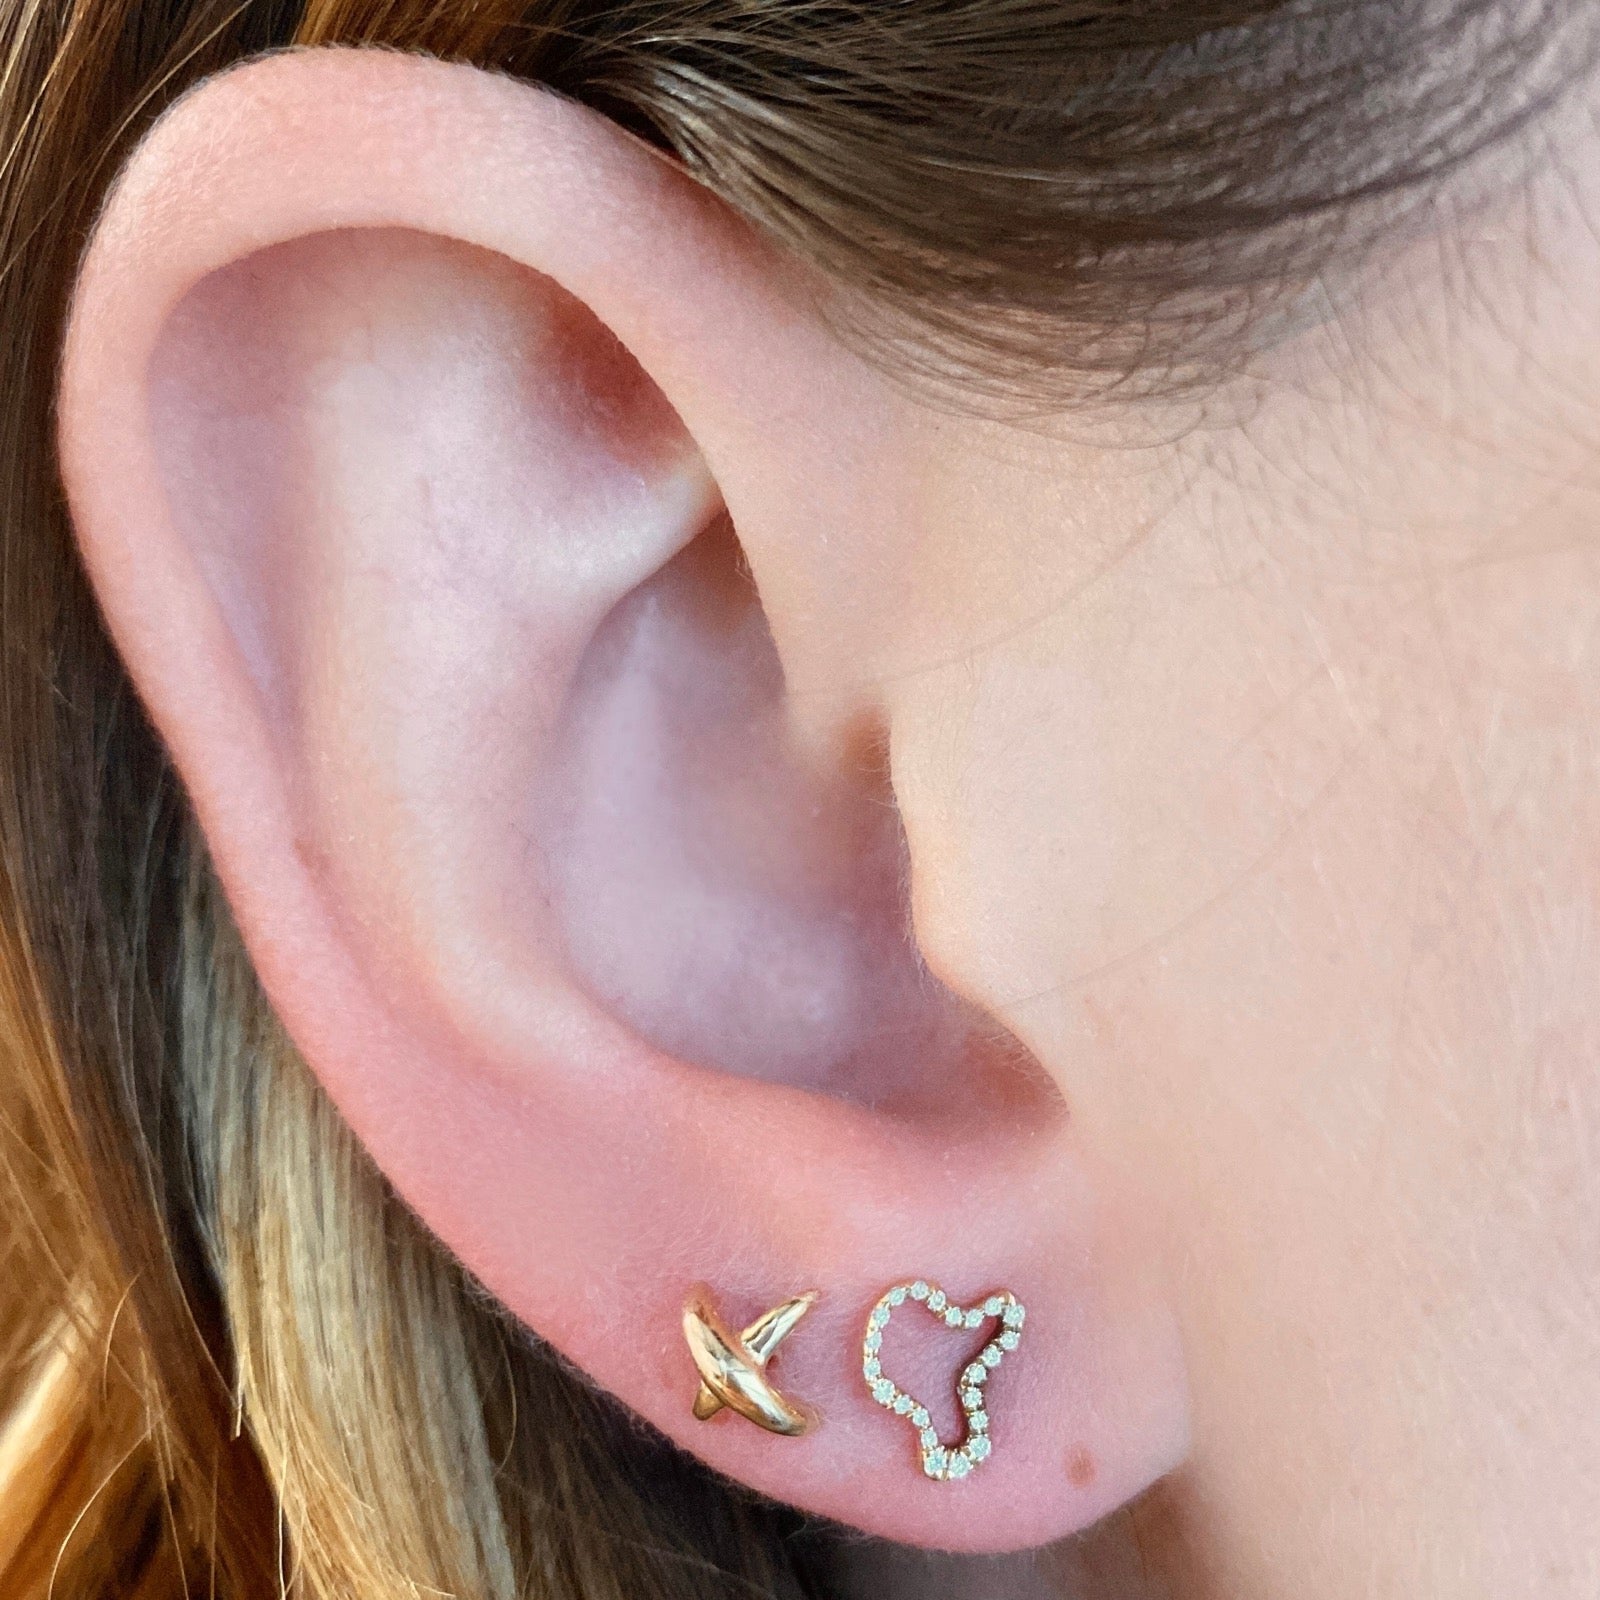 14k gold Full Pave Ripple Stud Earring. Styled on a ear with a stitch stud earring